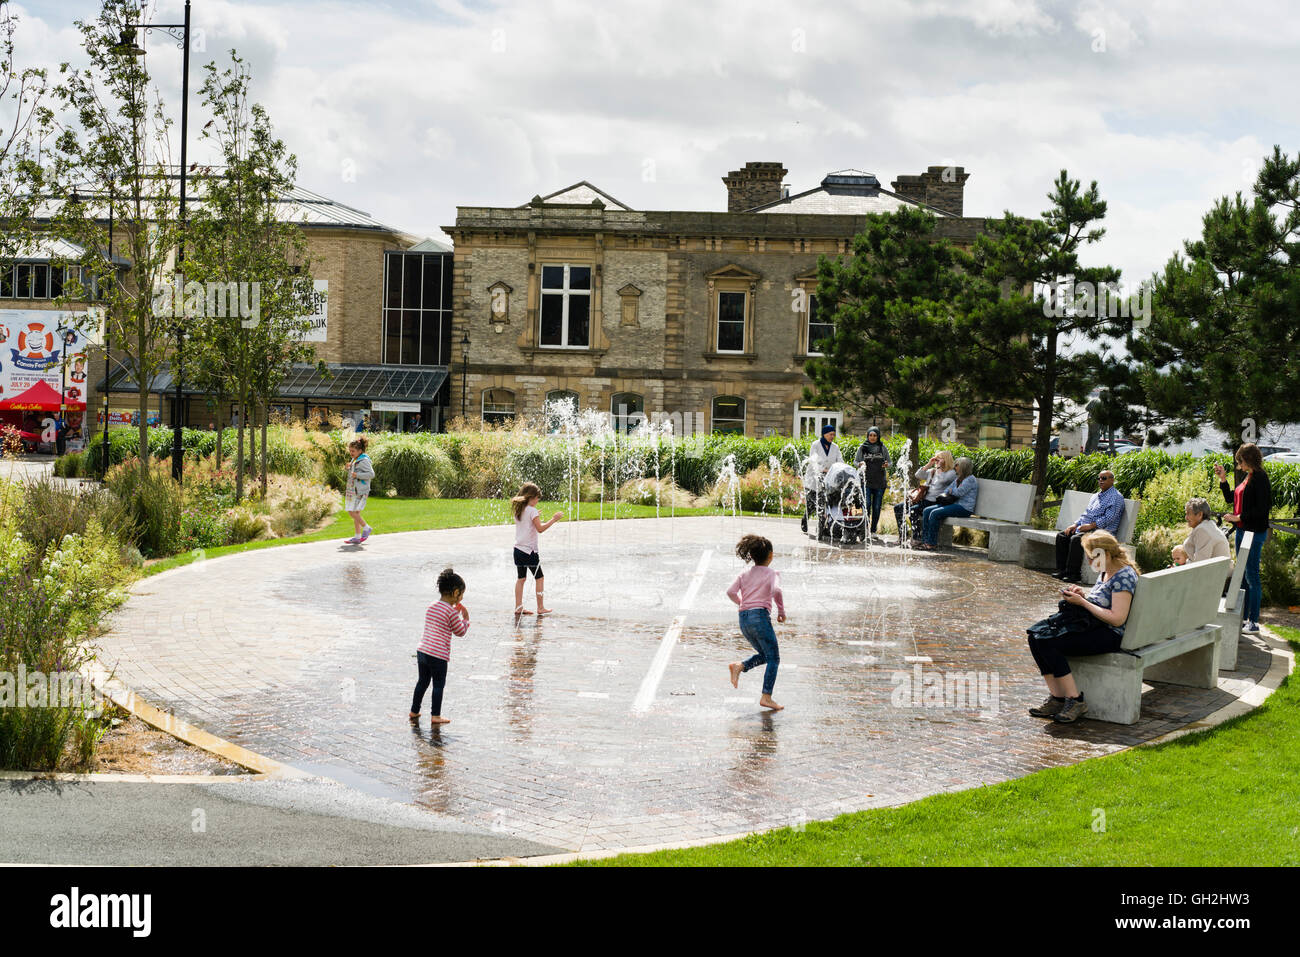 The Customs House arts and theatre, gallery, café complex at Harton Quay South Shields, Tyneside. Children play in fountain. Stock Photo